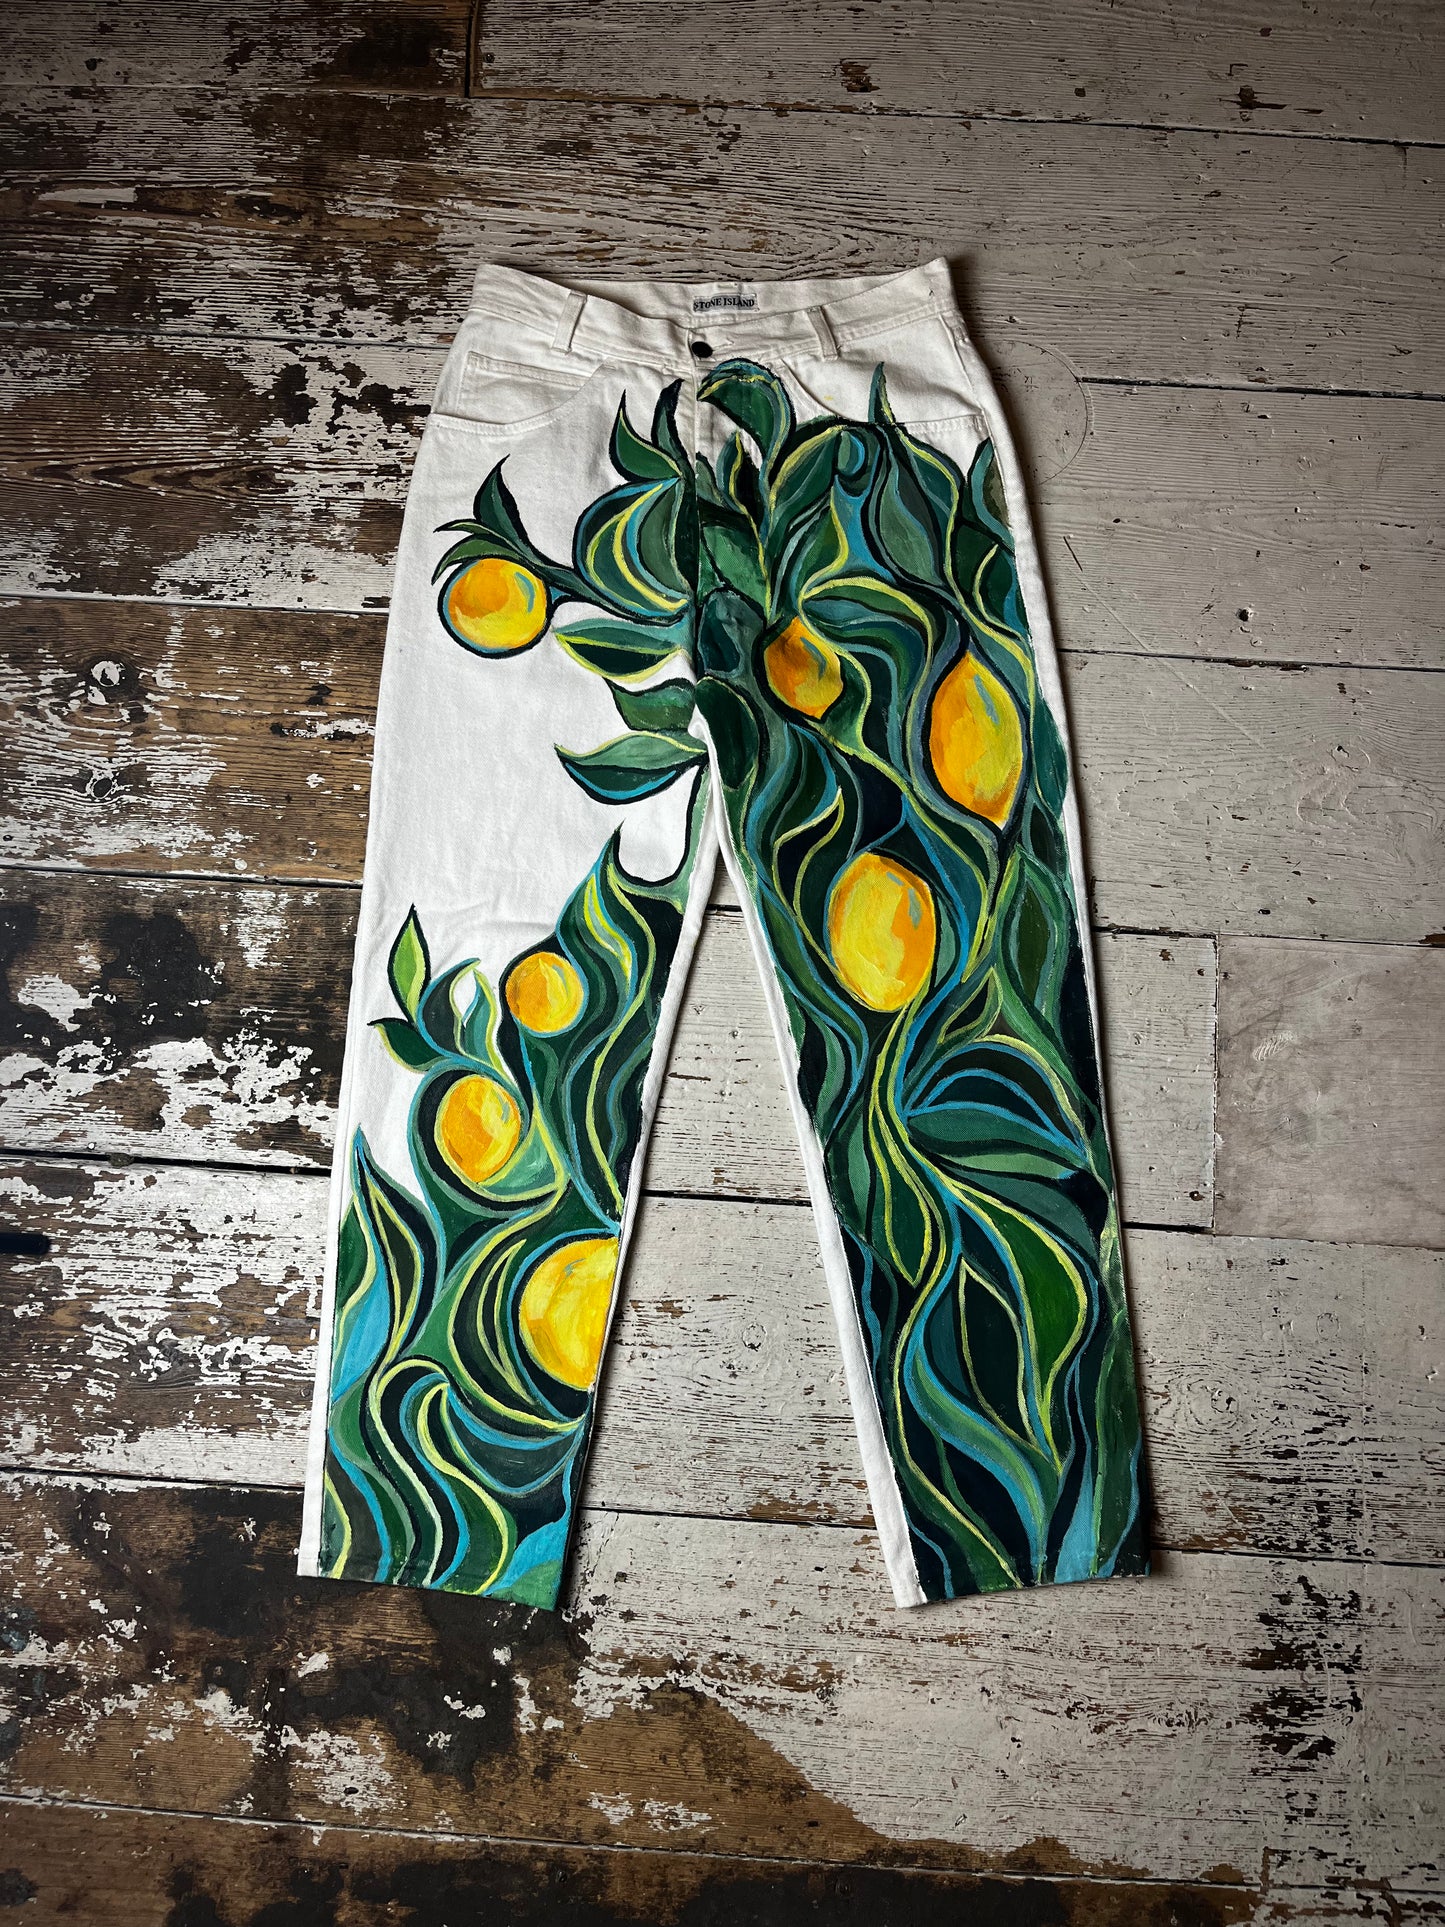 Stone Island “Lemons and Leaves” jeans by Anna Floto